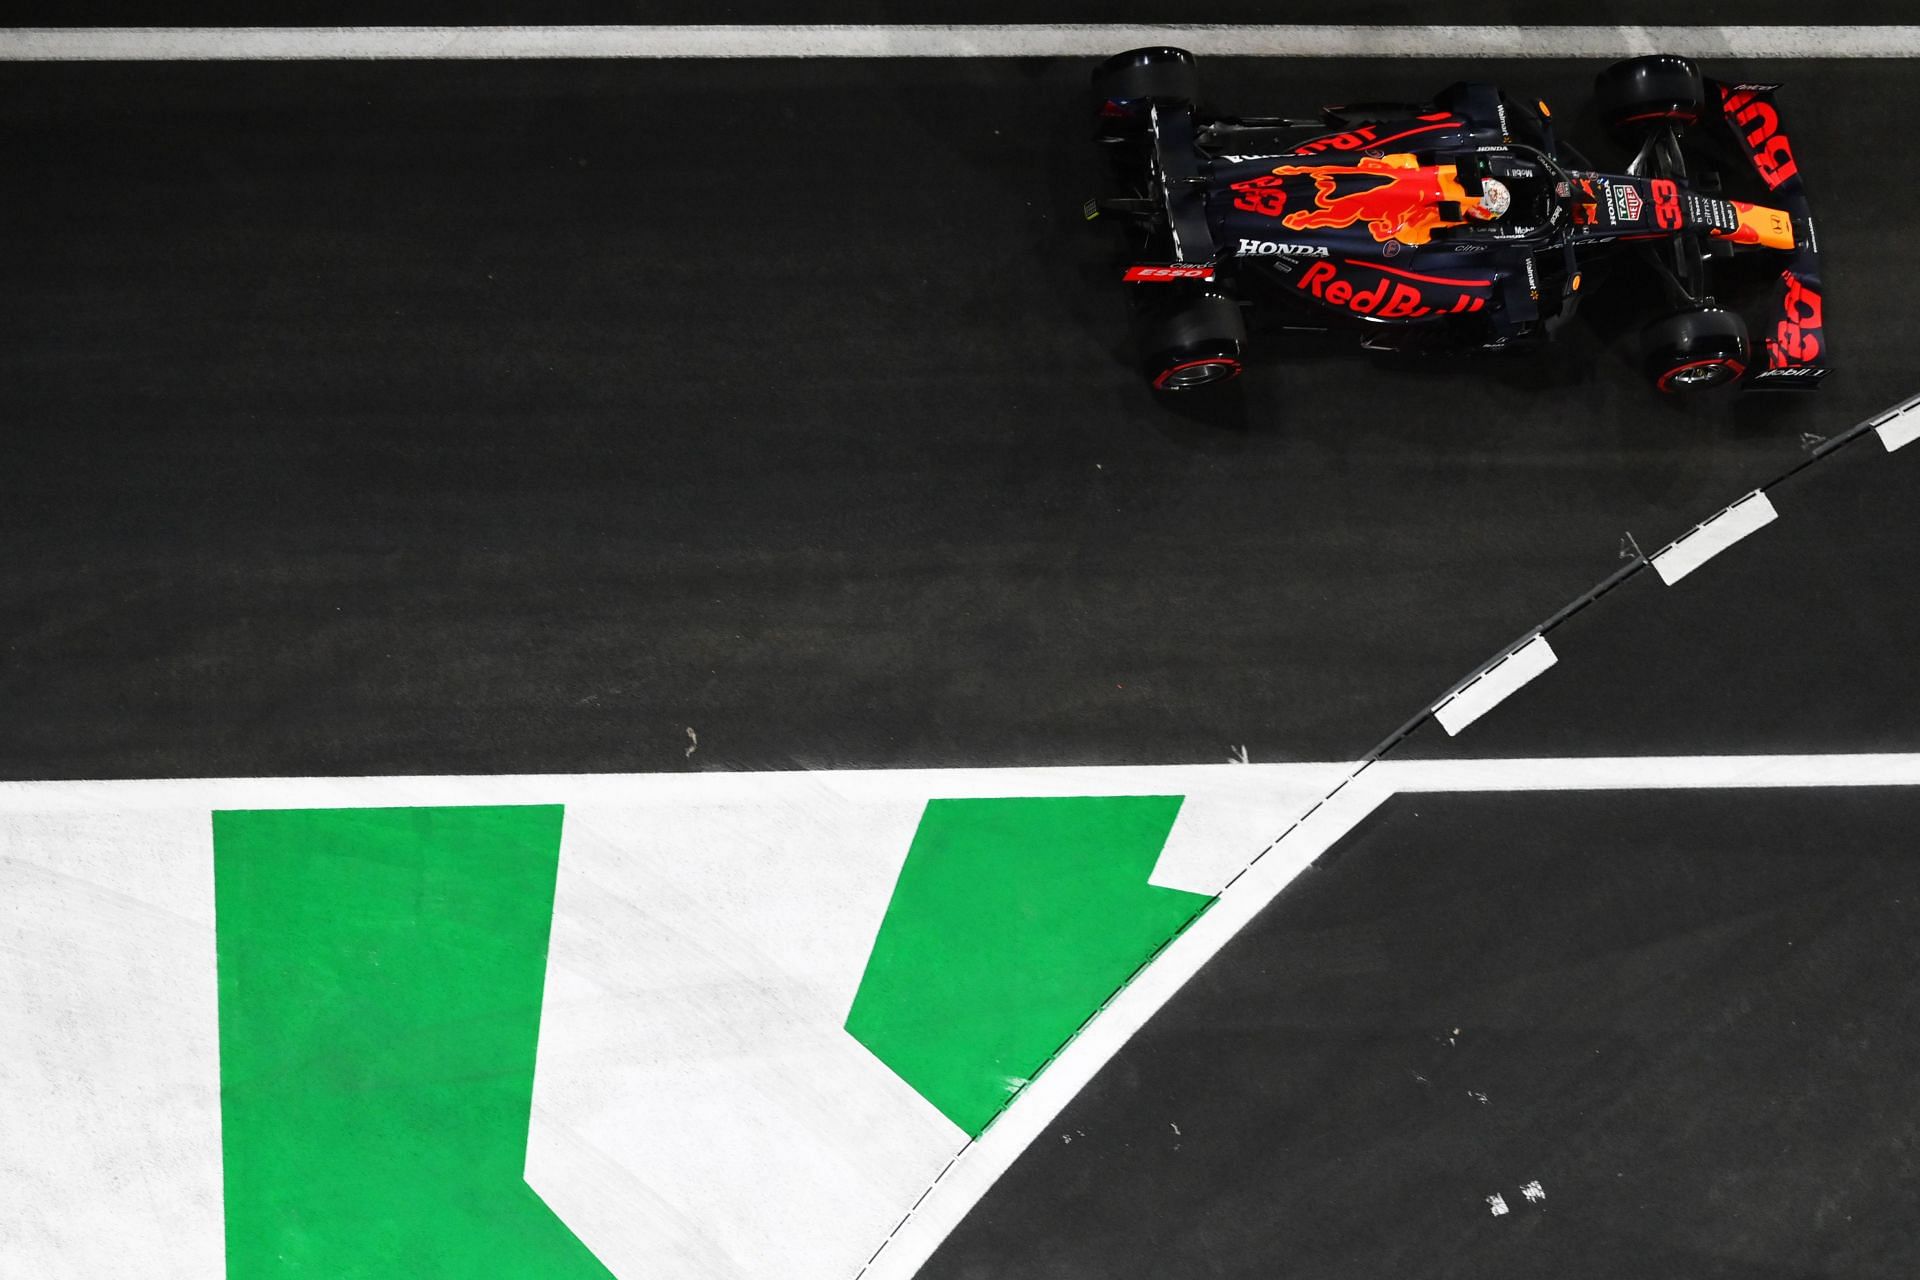 F1 Grand Prix of Saudi Arabia - Max Verstappen shows unreal pace in qualifying.